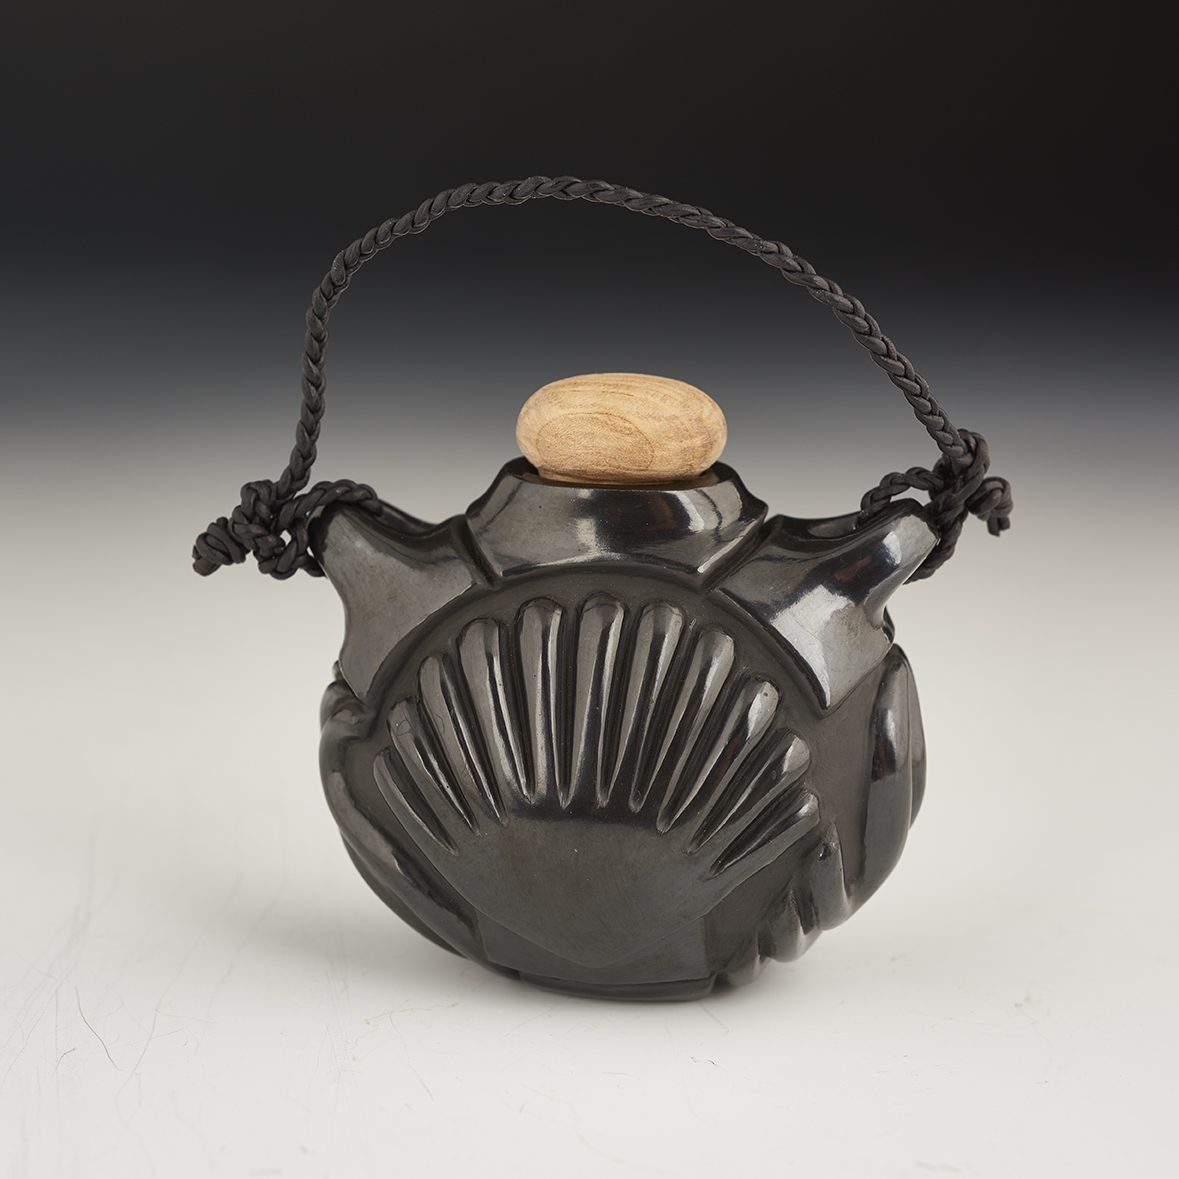 Shell and Avanyu Miniature canteen with Stopper